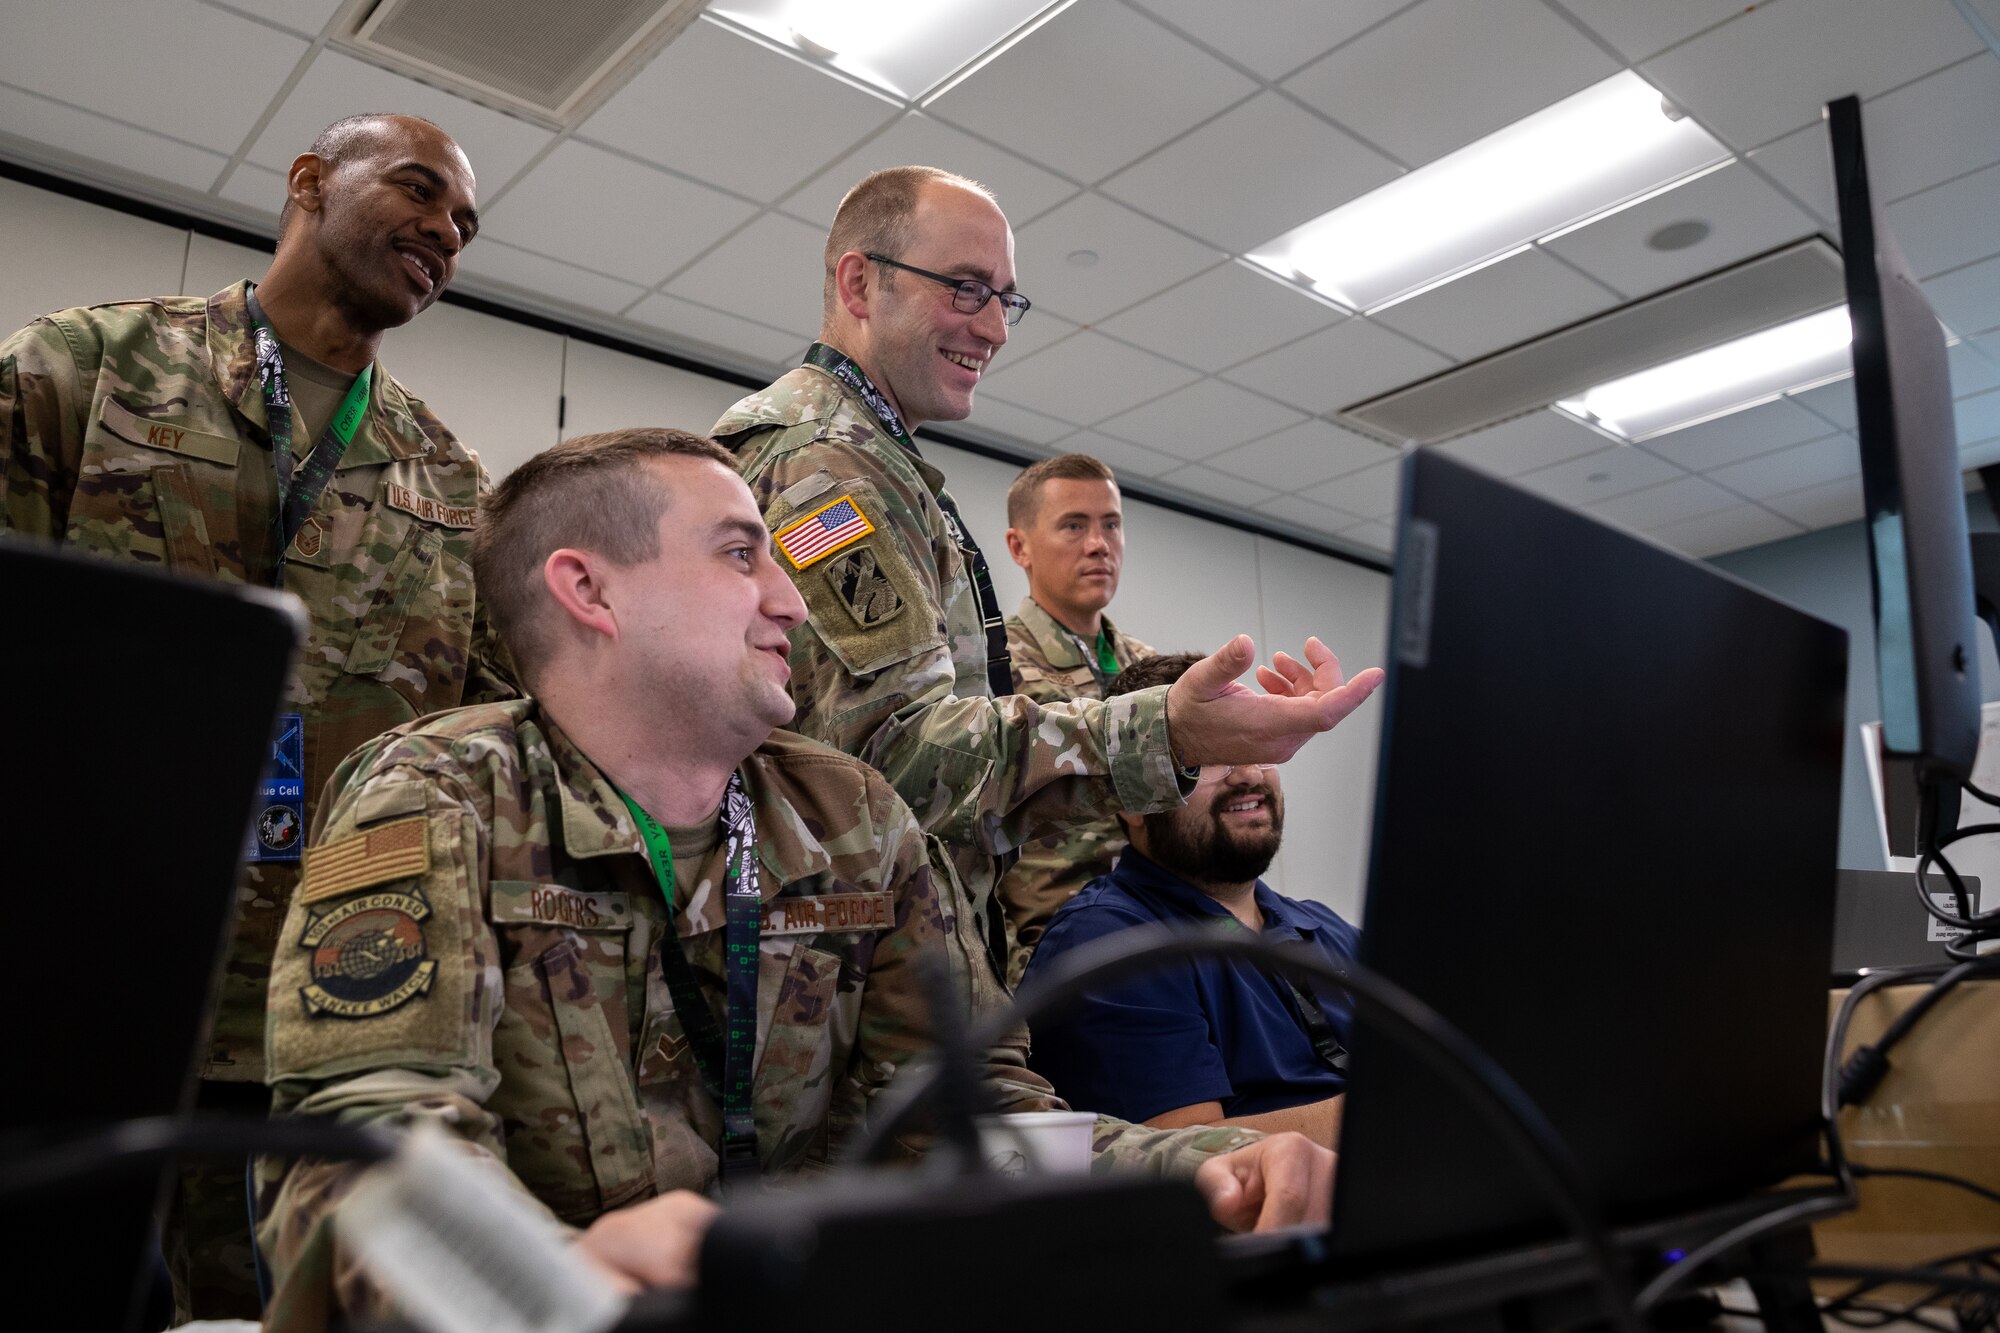 U.S. Army Staff Sgt. John Young, an information technology specialist assigned to Joint Forces Headquarters, Connecticut Army National Guard, points toward a computer monitor while communicating with U.S. Air Force airmen from 103rd Airlift Wing, Connecticut Air National Guard, at Camp Nett, Niantic, Connecticut, June 16, 2022. Soldiers and airmen from across Connecticut, and New England, worked hand in hand during Cyber Yankee to defend against a simulated cyber attack. (U.S. Army photo by Sgt. Matthew Lucibello)